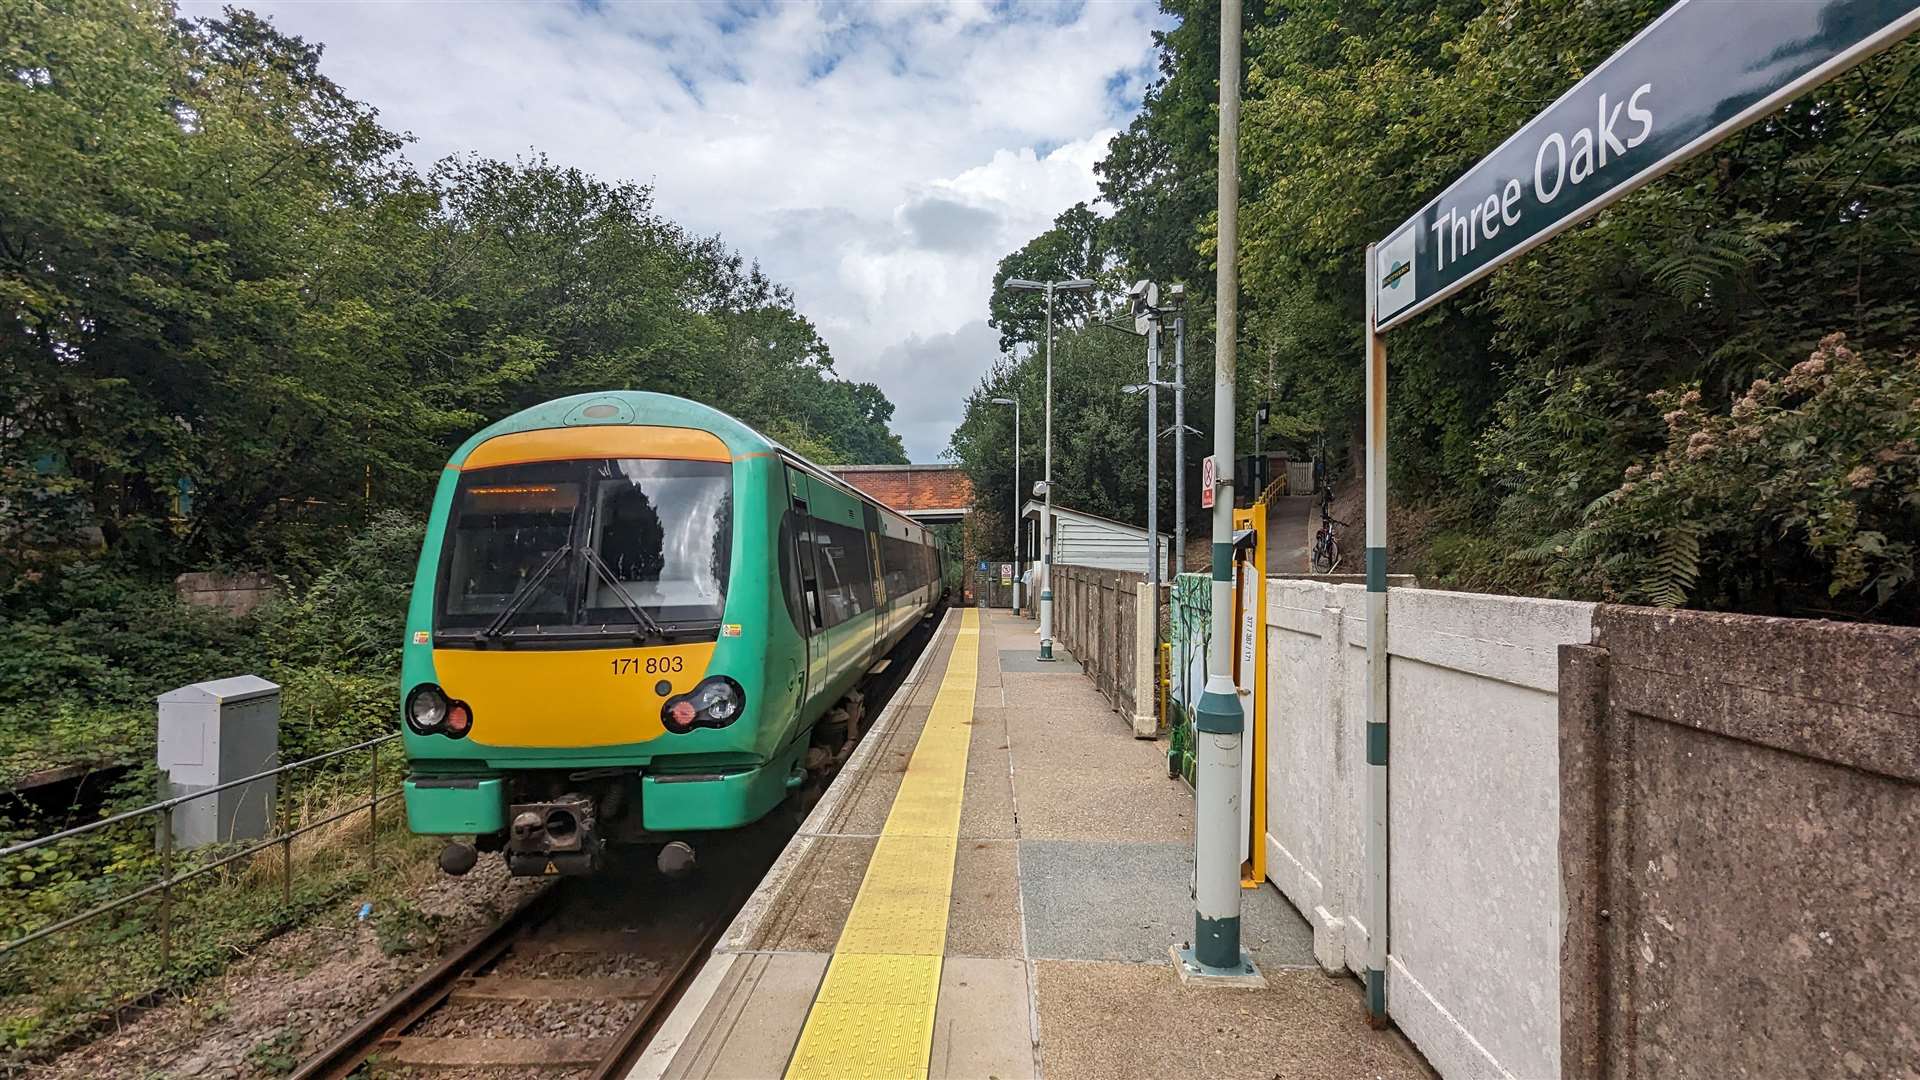 The Marshlink train pulling away from Three Oaks station on the line between Hastings and Ashford